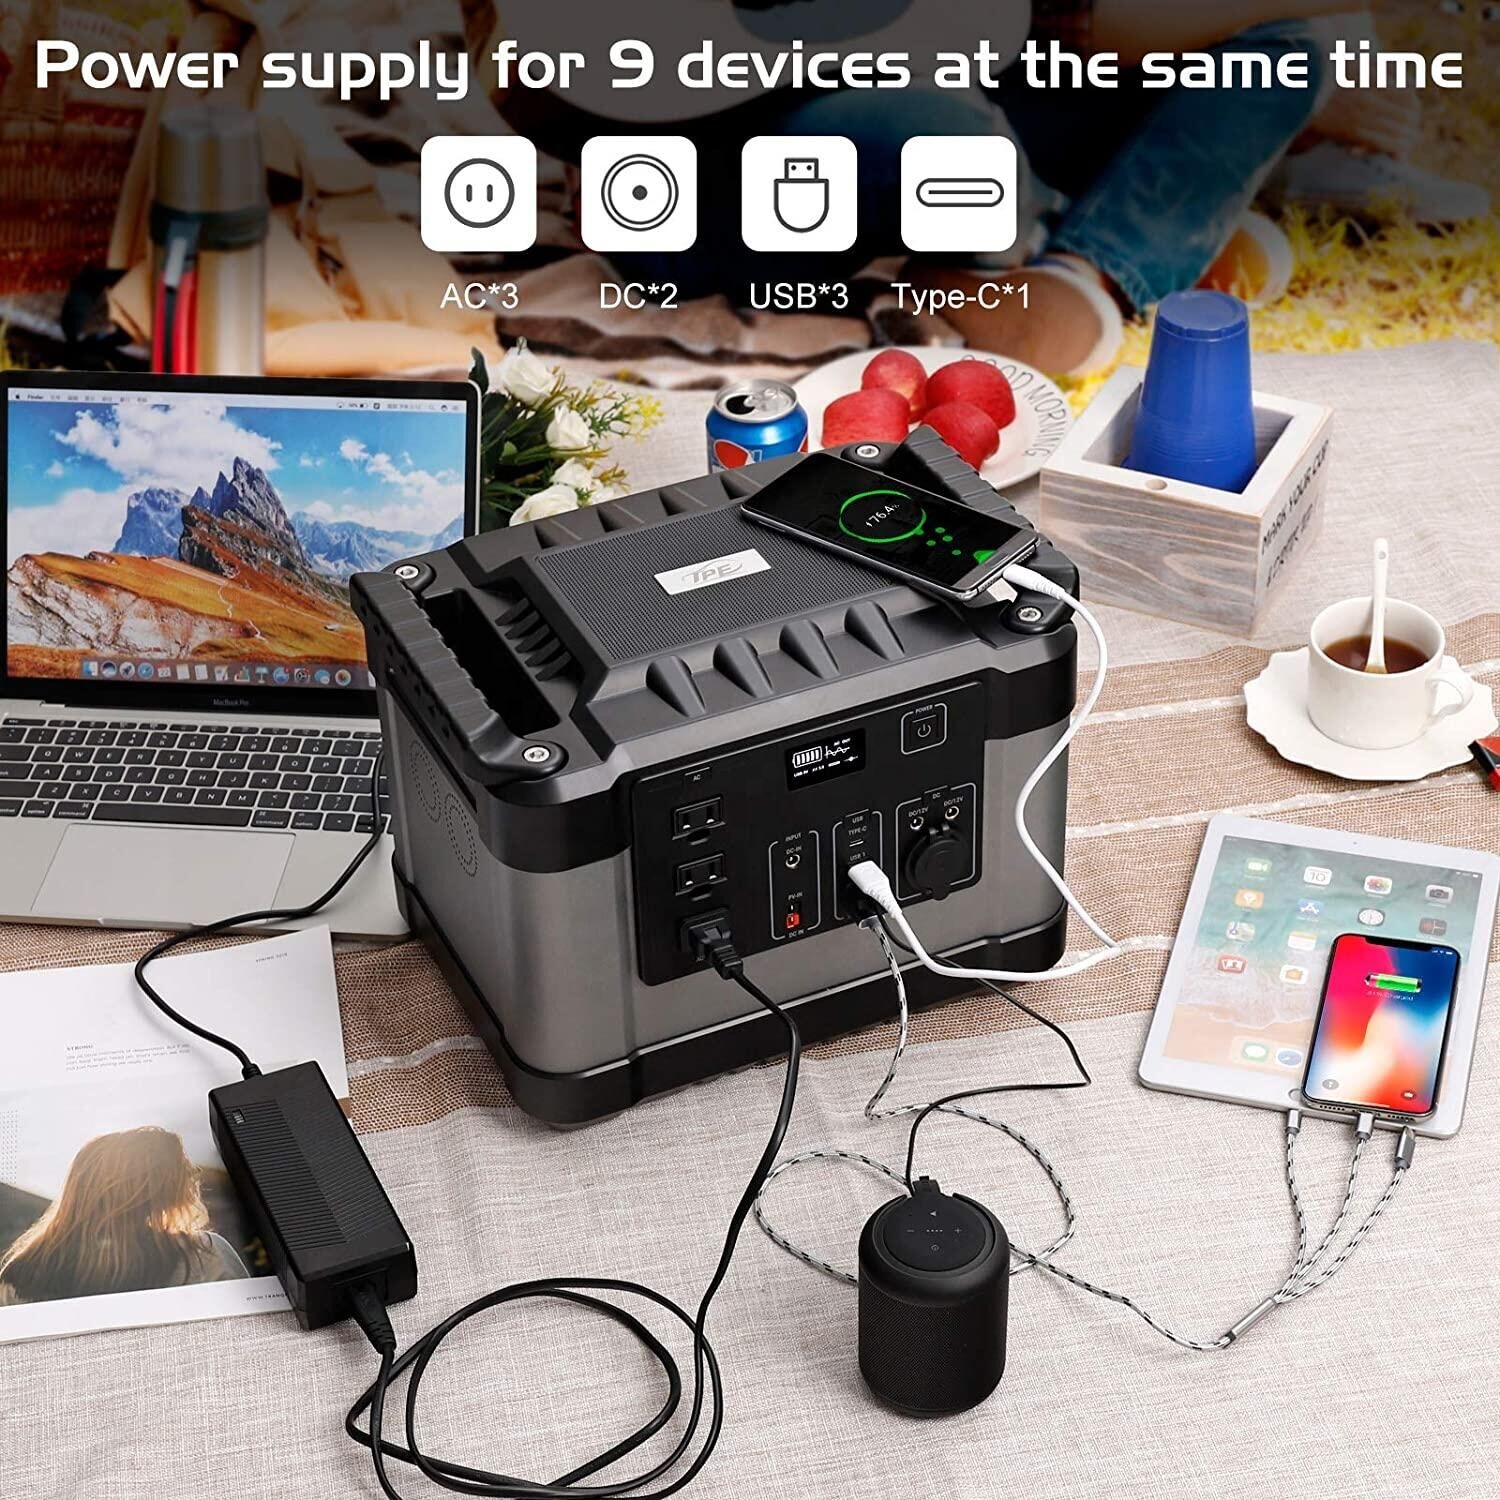 1000W portable power station for outdoor camping with AC110V 220V output USB output Type C socket